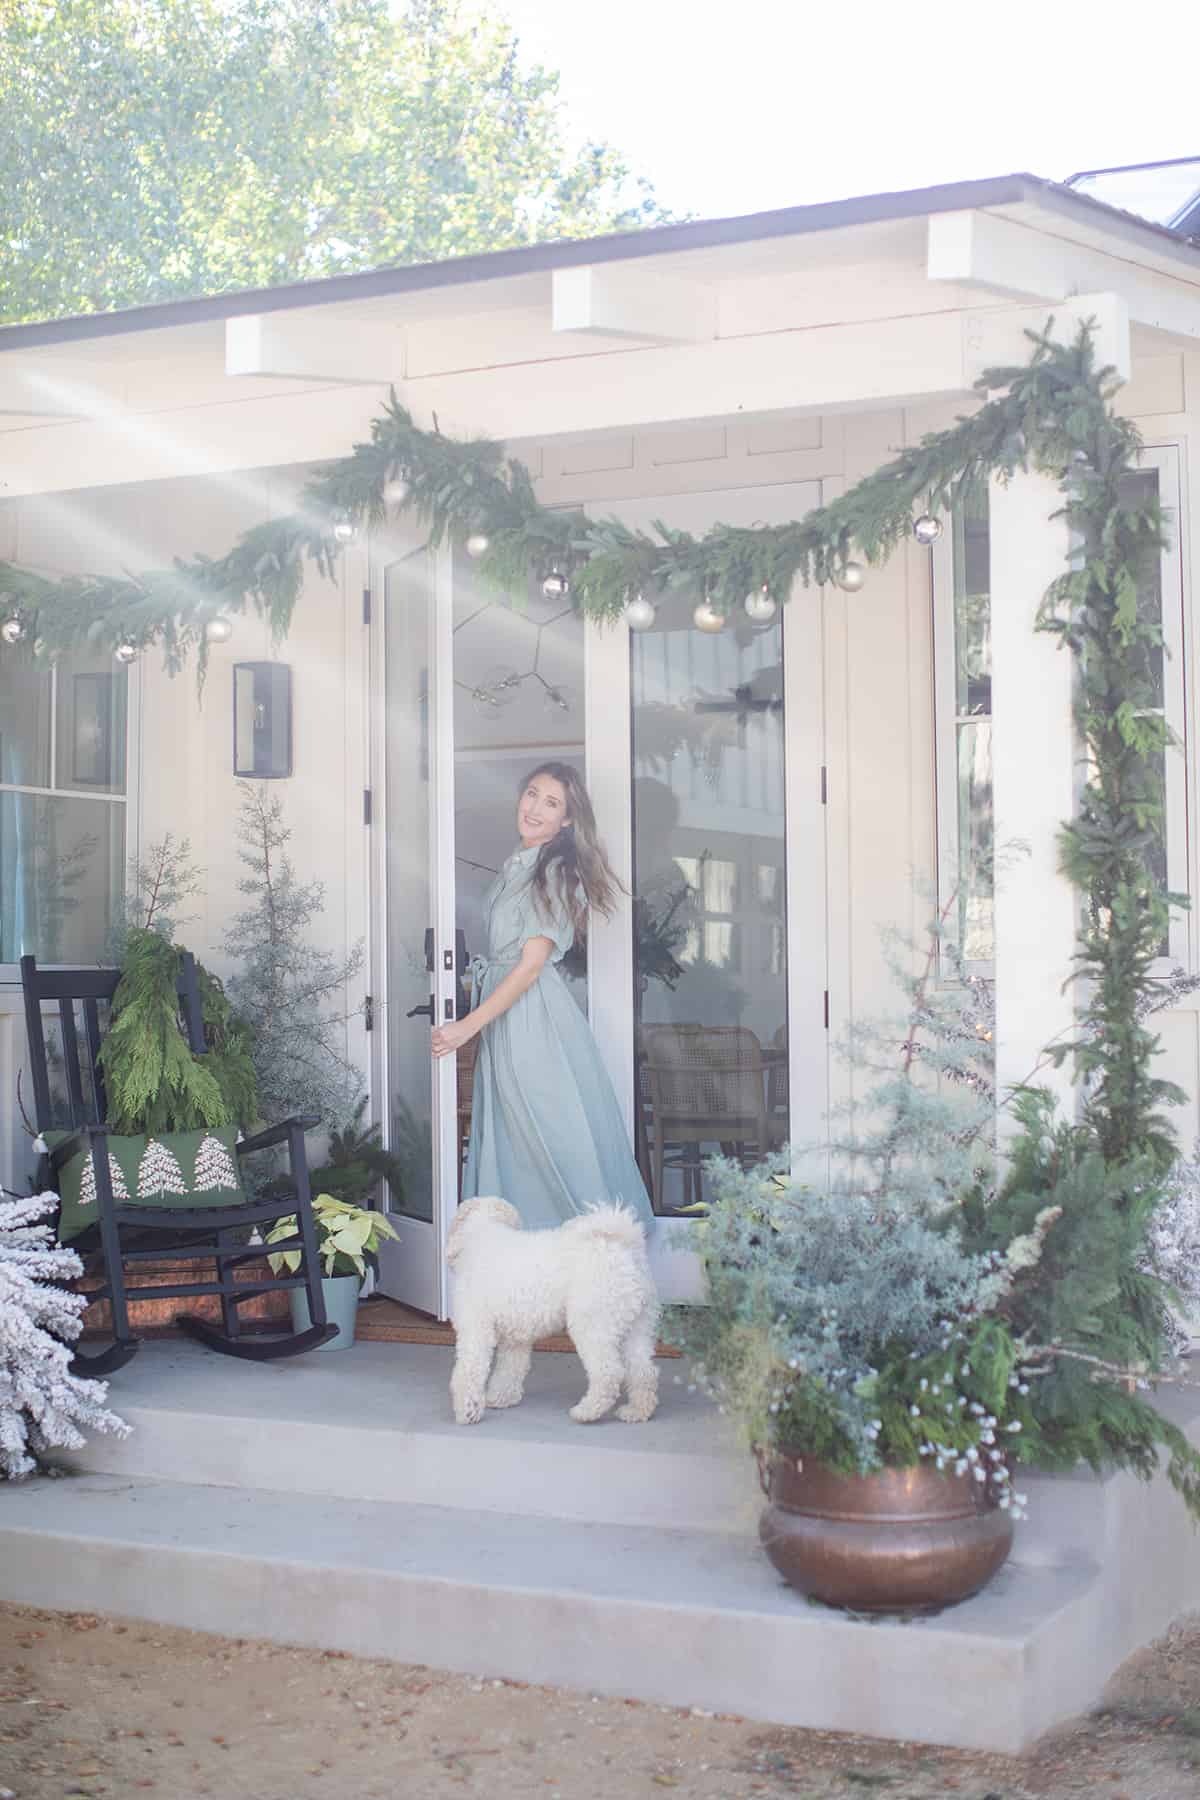 Eden Passante on her front porch for Christmas.